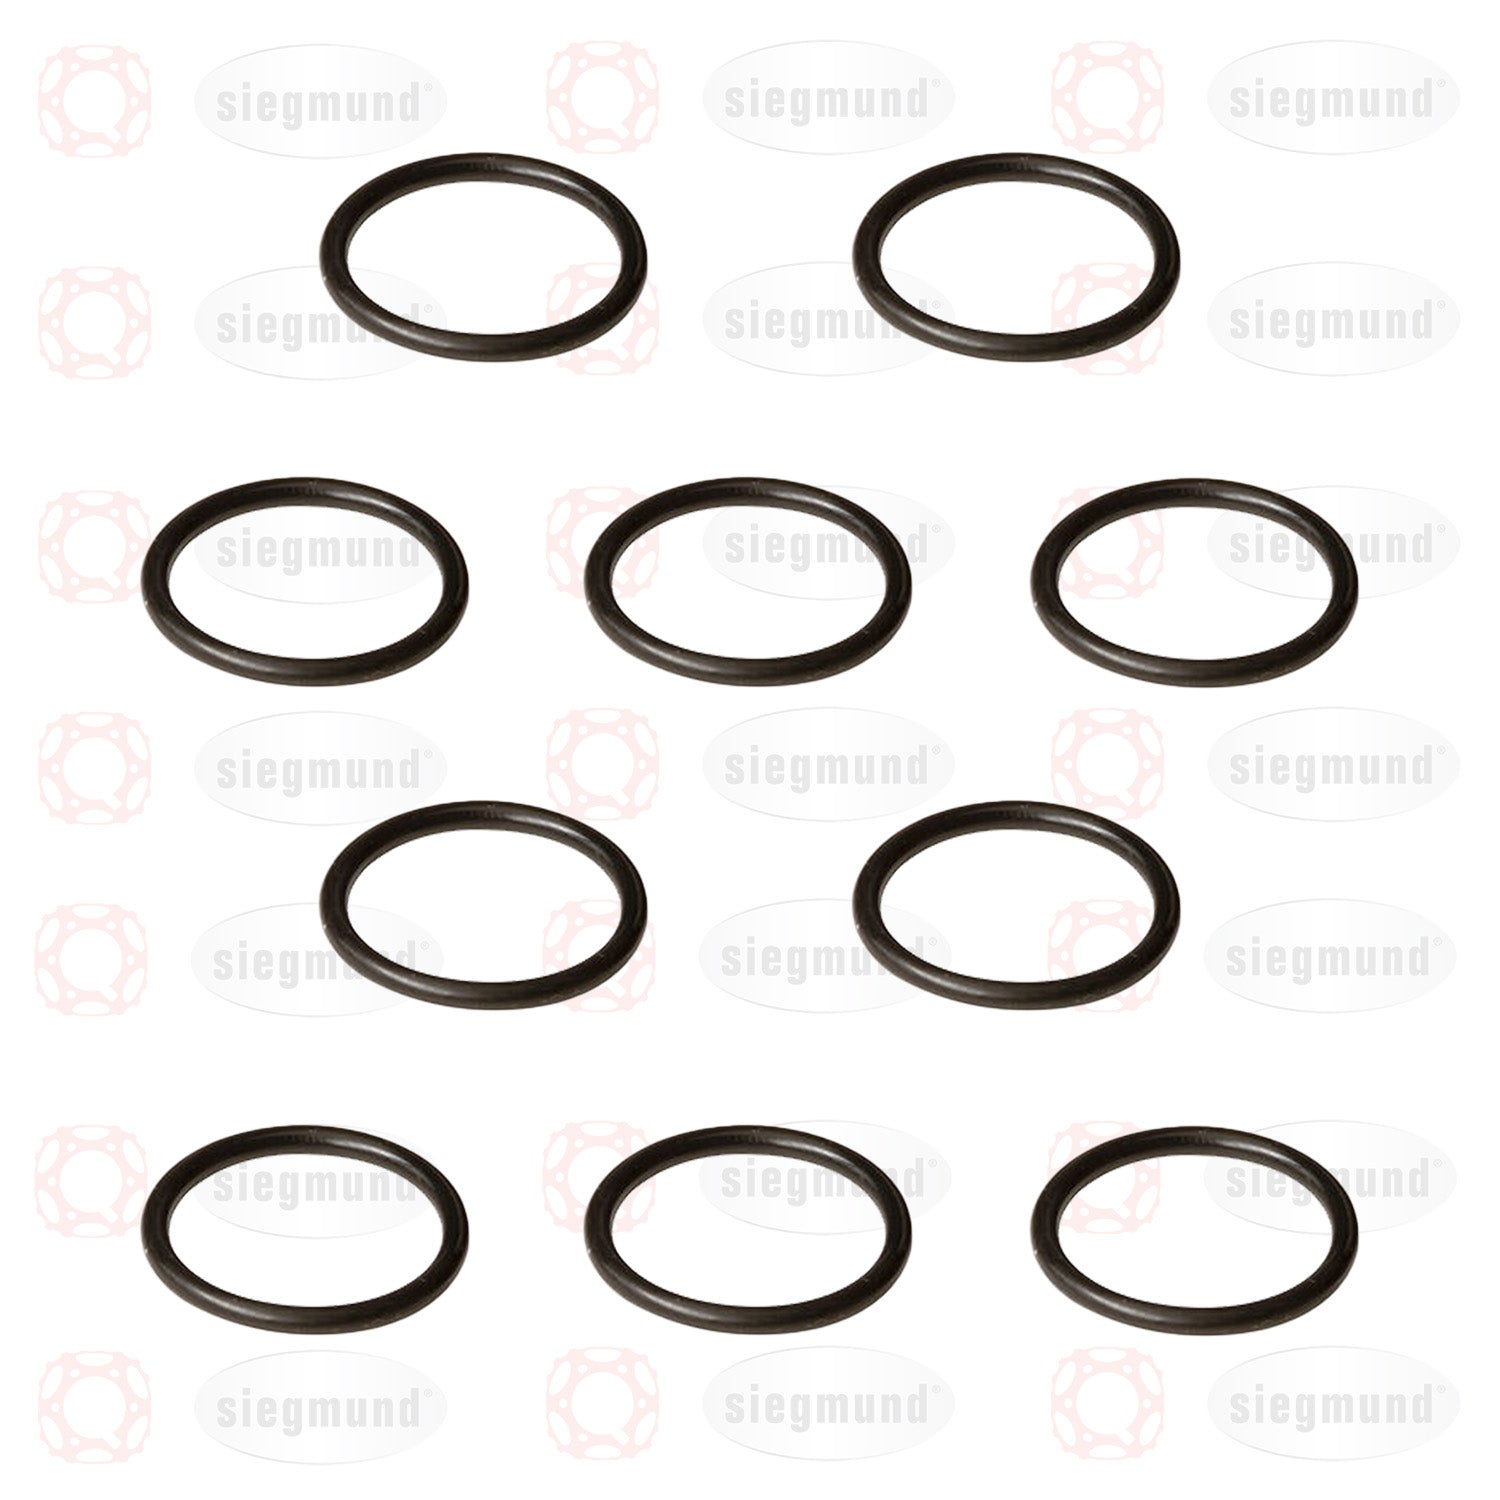 2-289009.10: Pack of 10 O-Rings for System 28 Welding Table Accessories